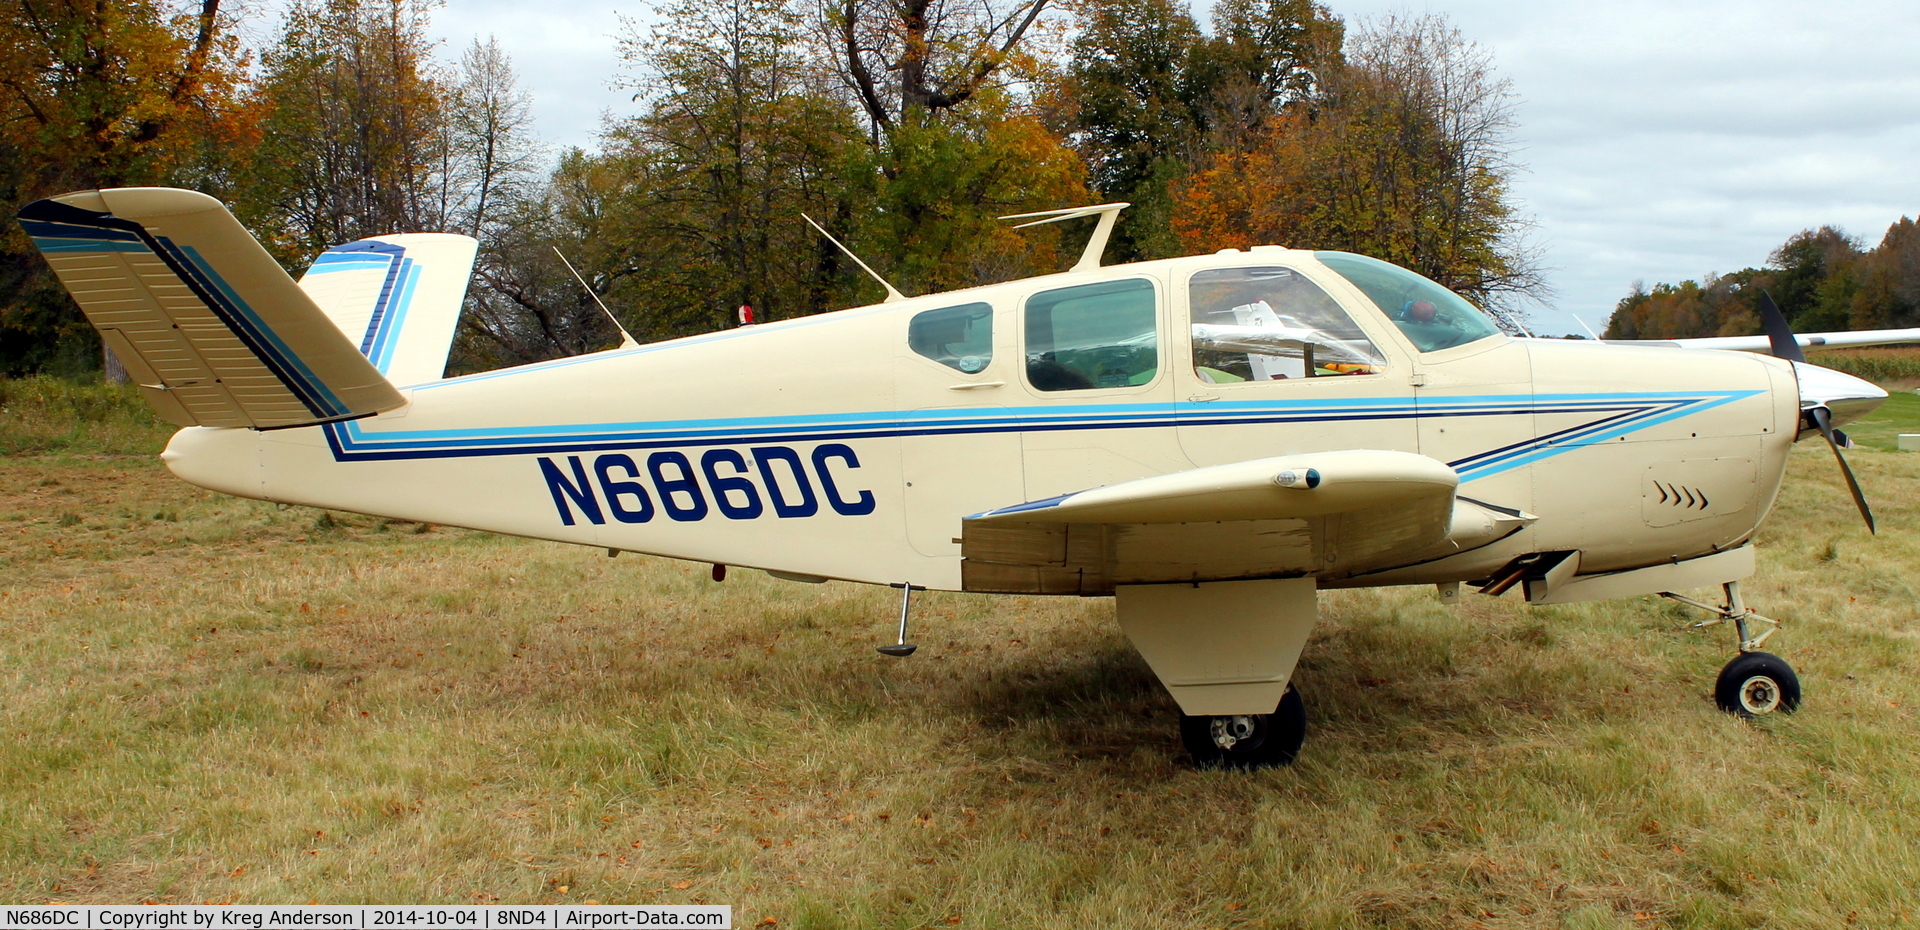 N686DC, 1956 Beech G35 Bonanza C/N D-4748, 2014 EAA Chapter 1342 Fall Cook-Out, Camp-Out & Fly-in